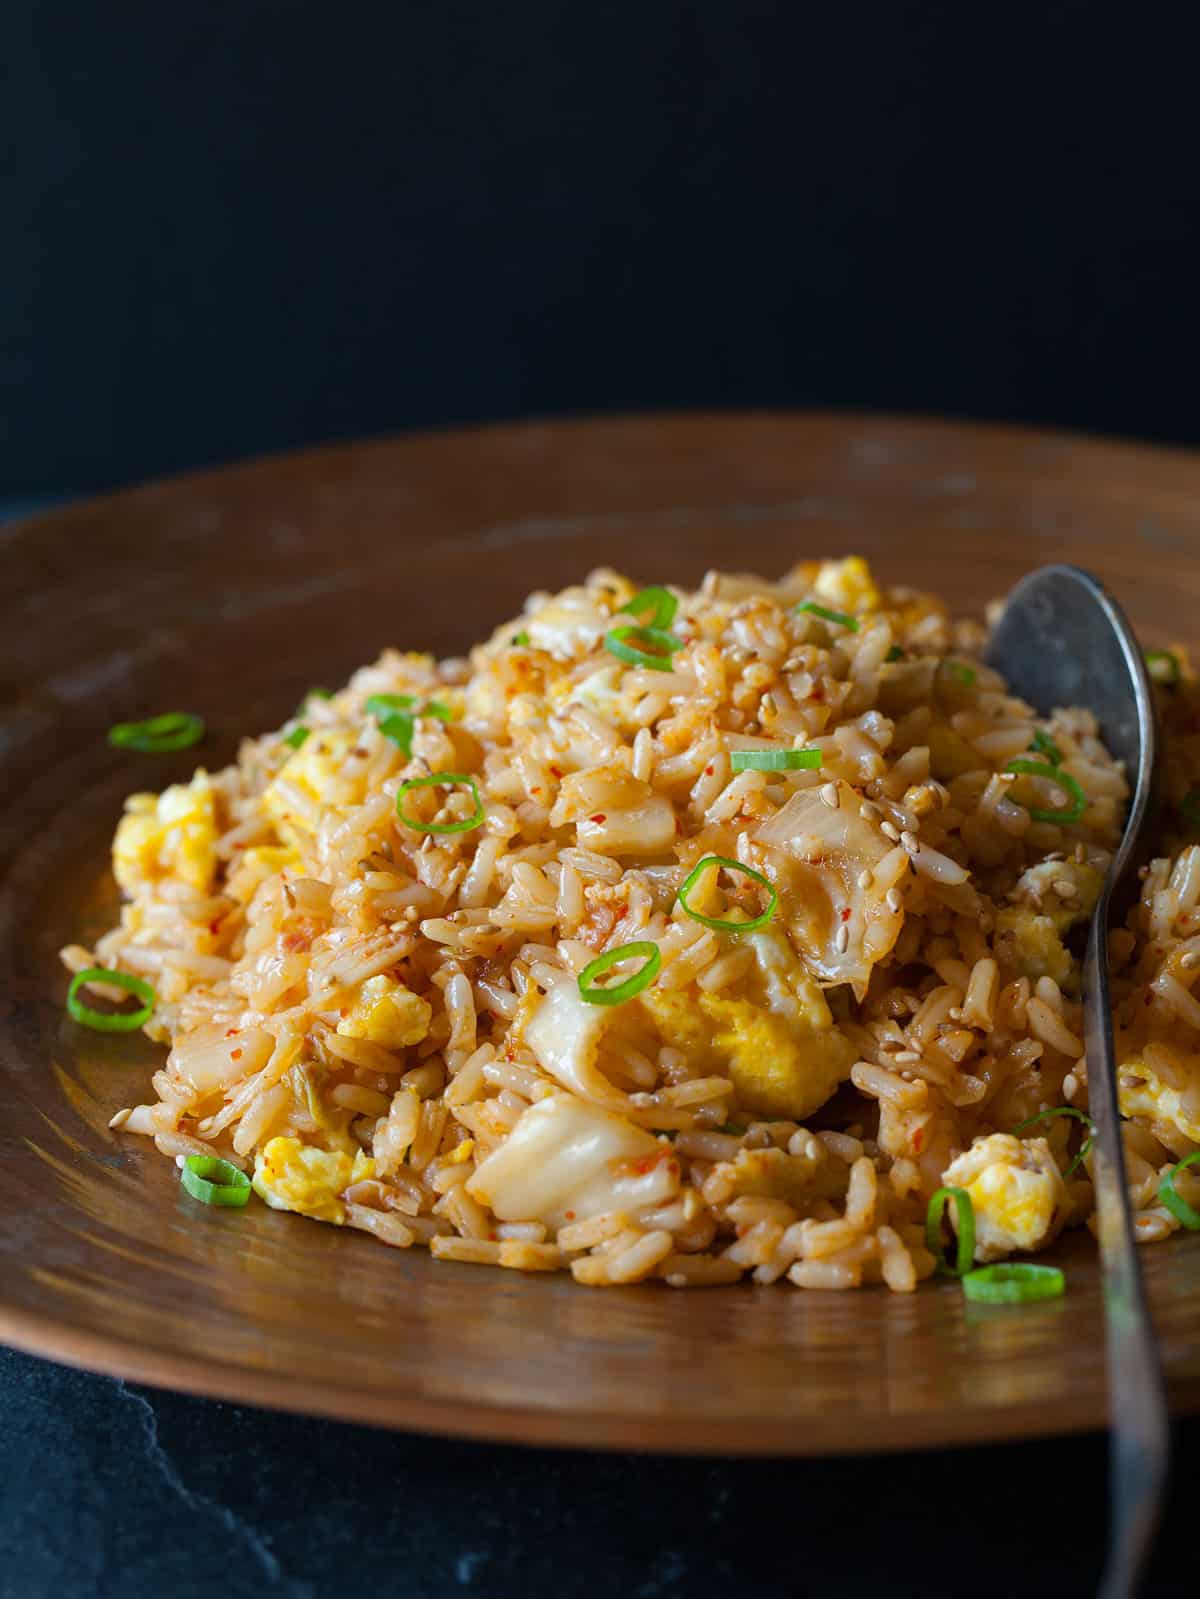 kimchi fried rice recipe makes a great side dish